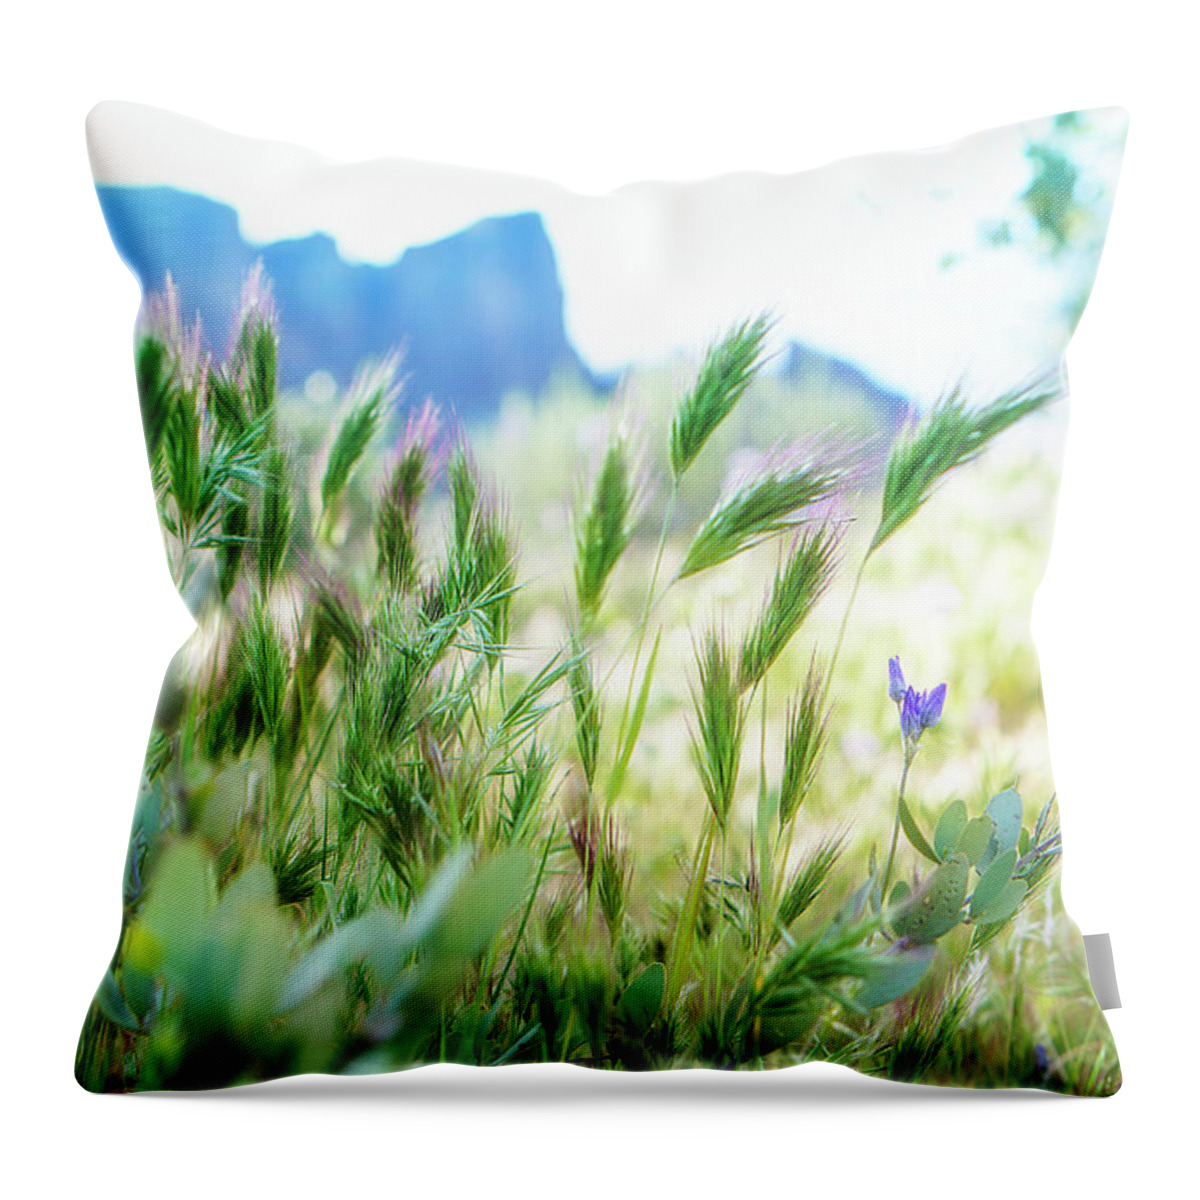 Wild Grass Throw Pillow featuring the photograph Gentle Rising by Lisa Spencer